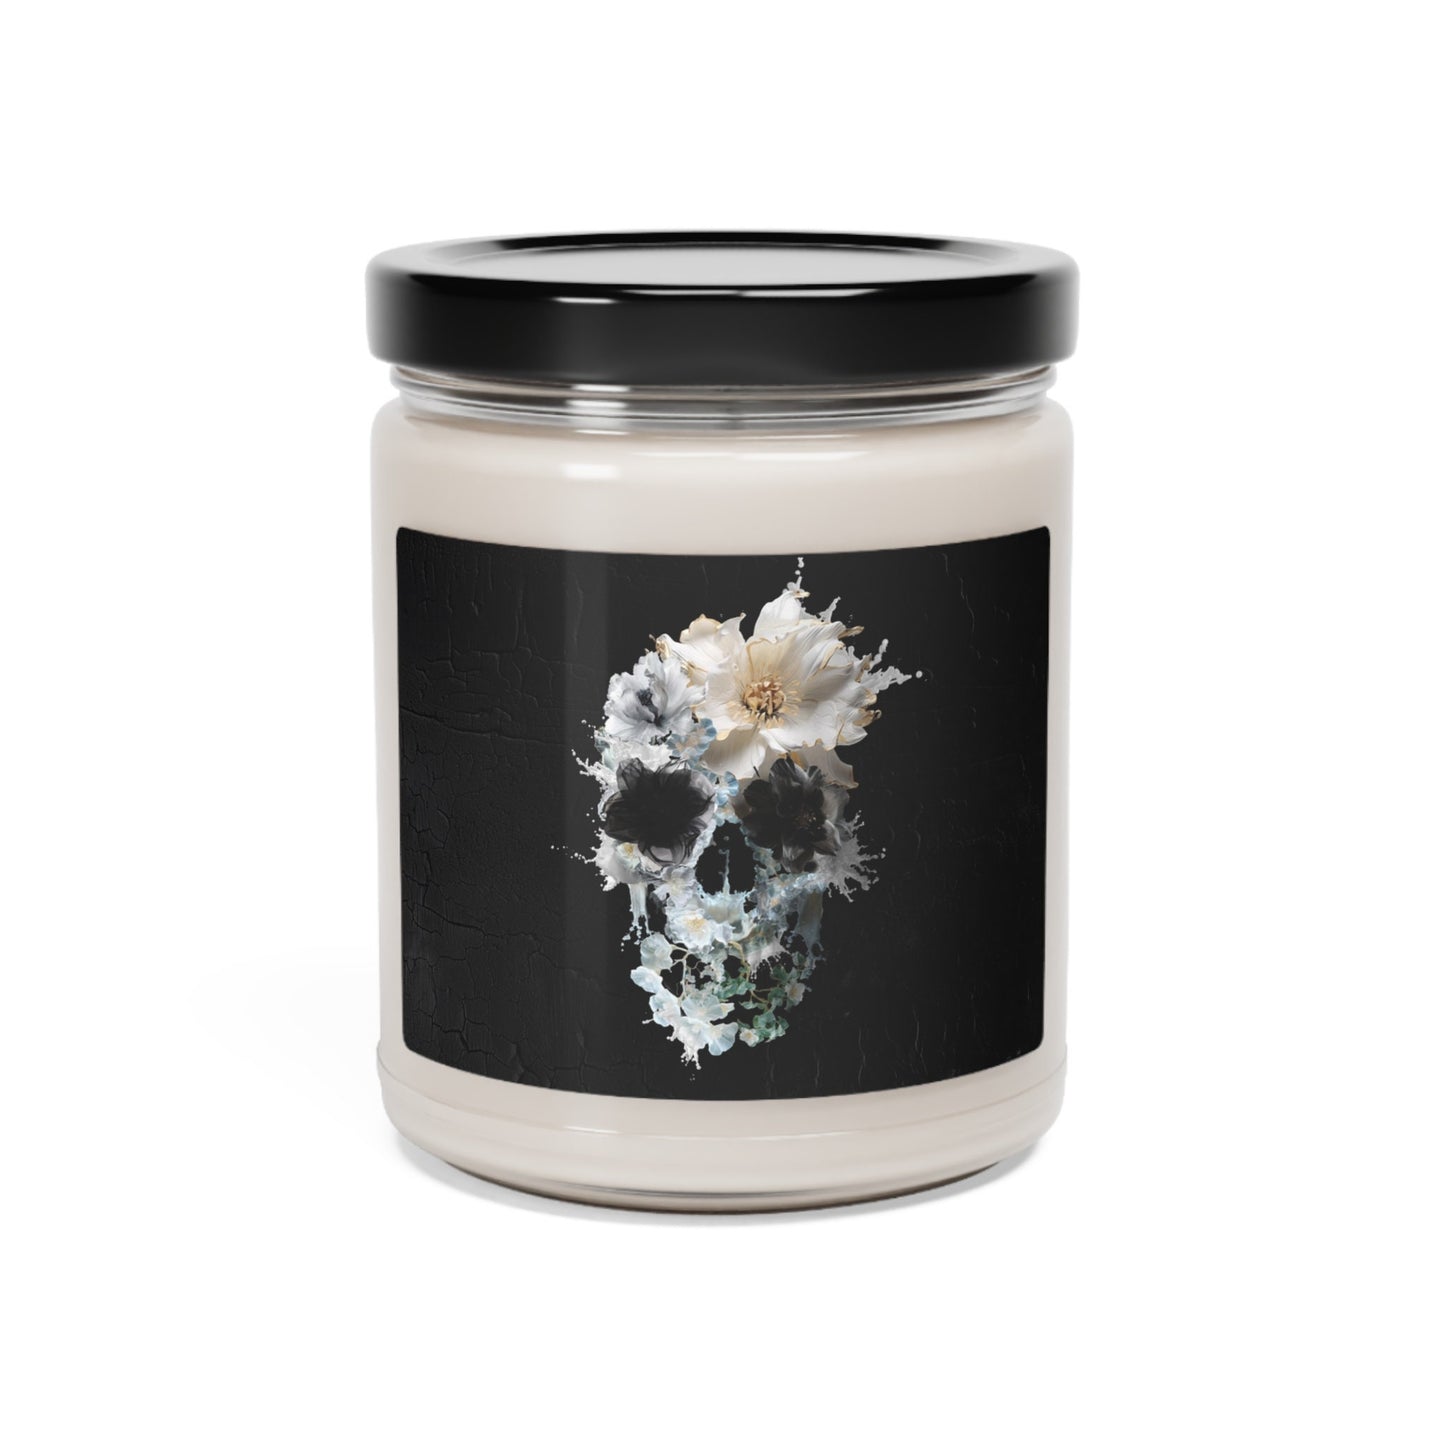 Skull Scented Soy Candle, 9oz, Aromatic Skull Print Candle Home Decor